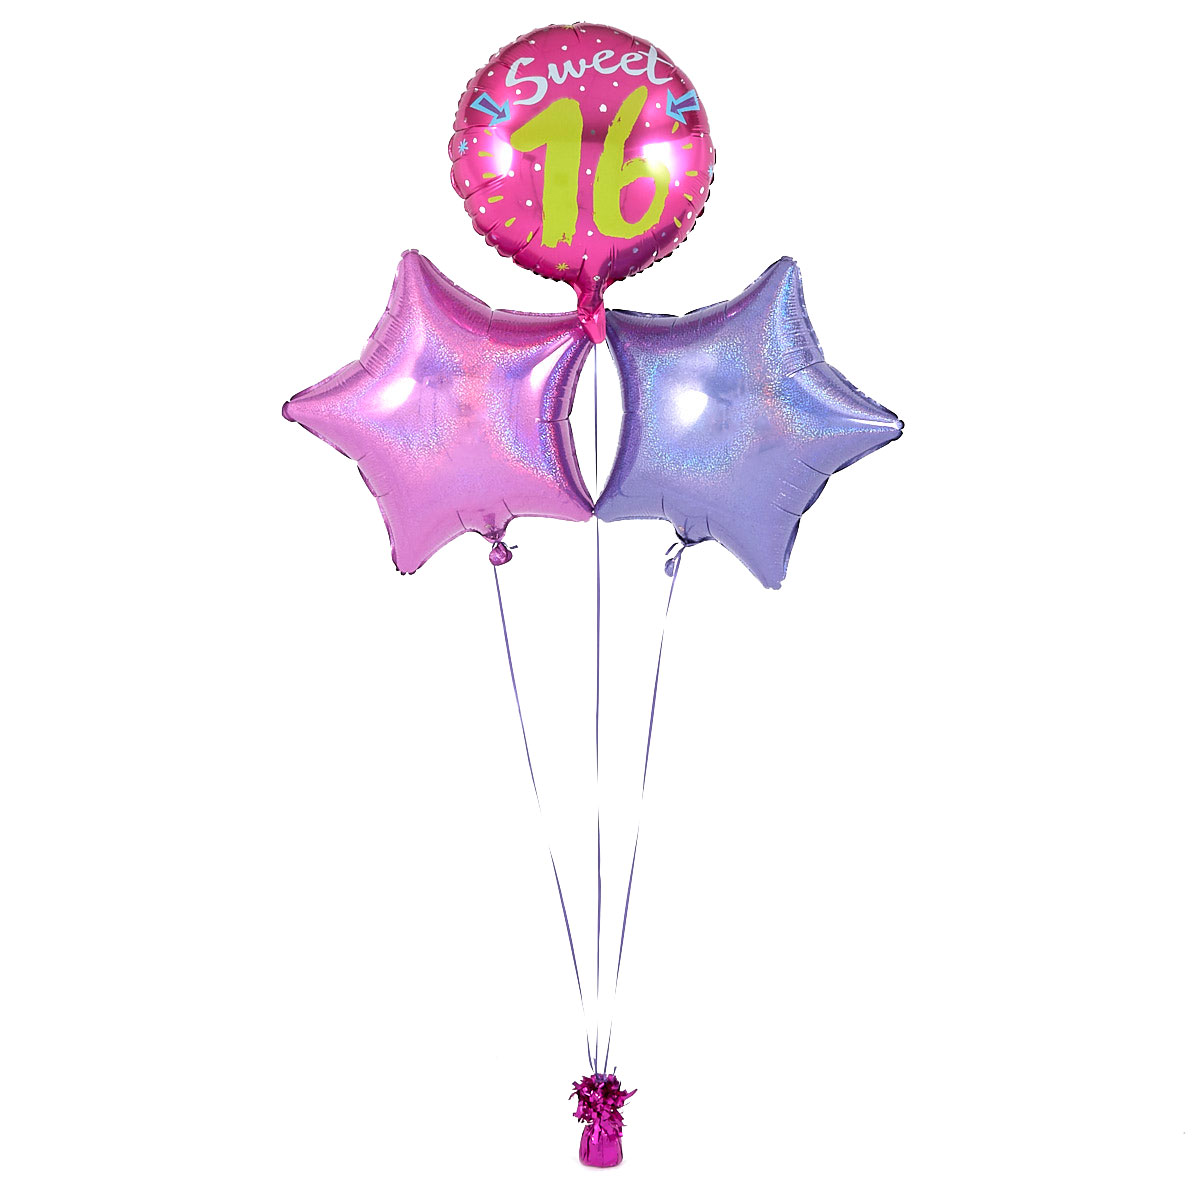 Sweet 16th Birthday Pink Balloon Bouquet - DELIVERED INFLATED!